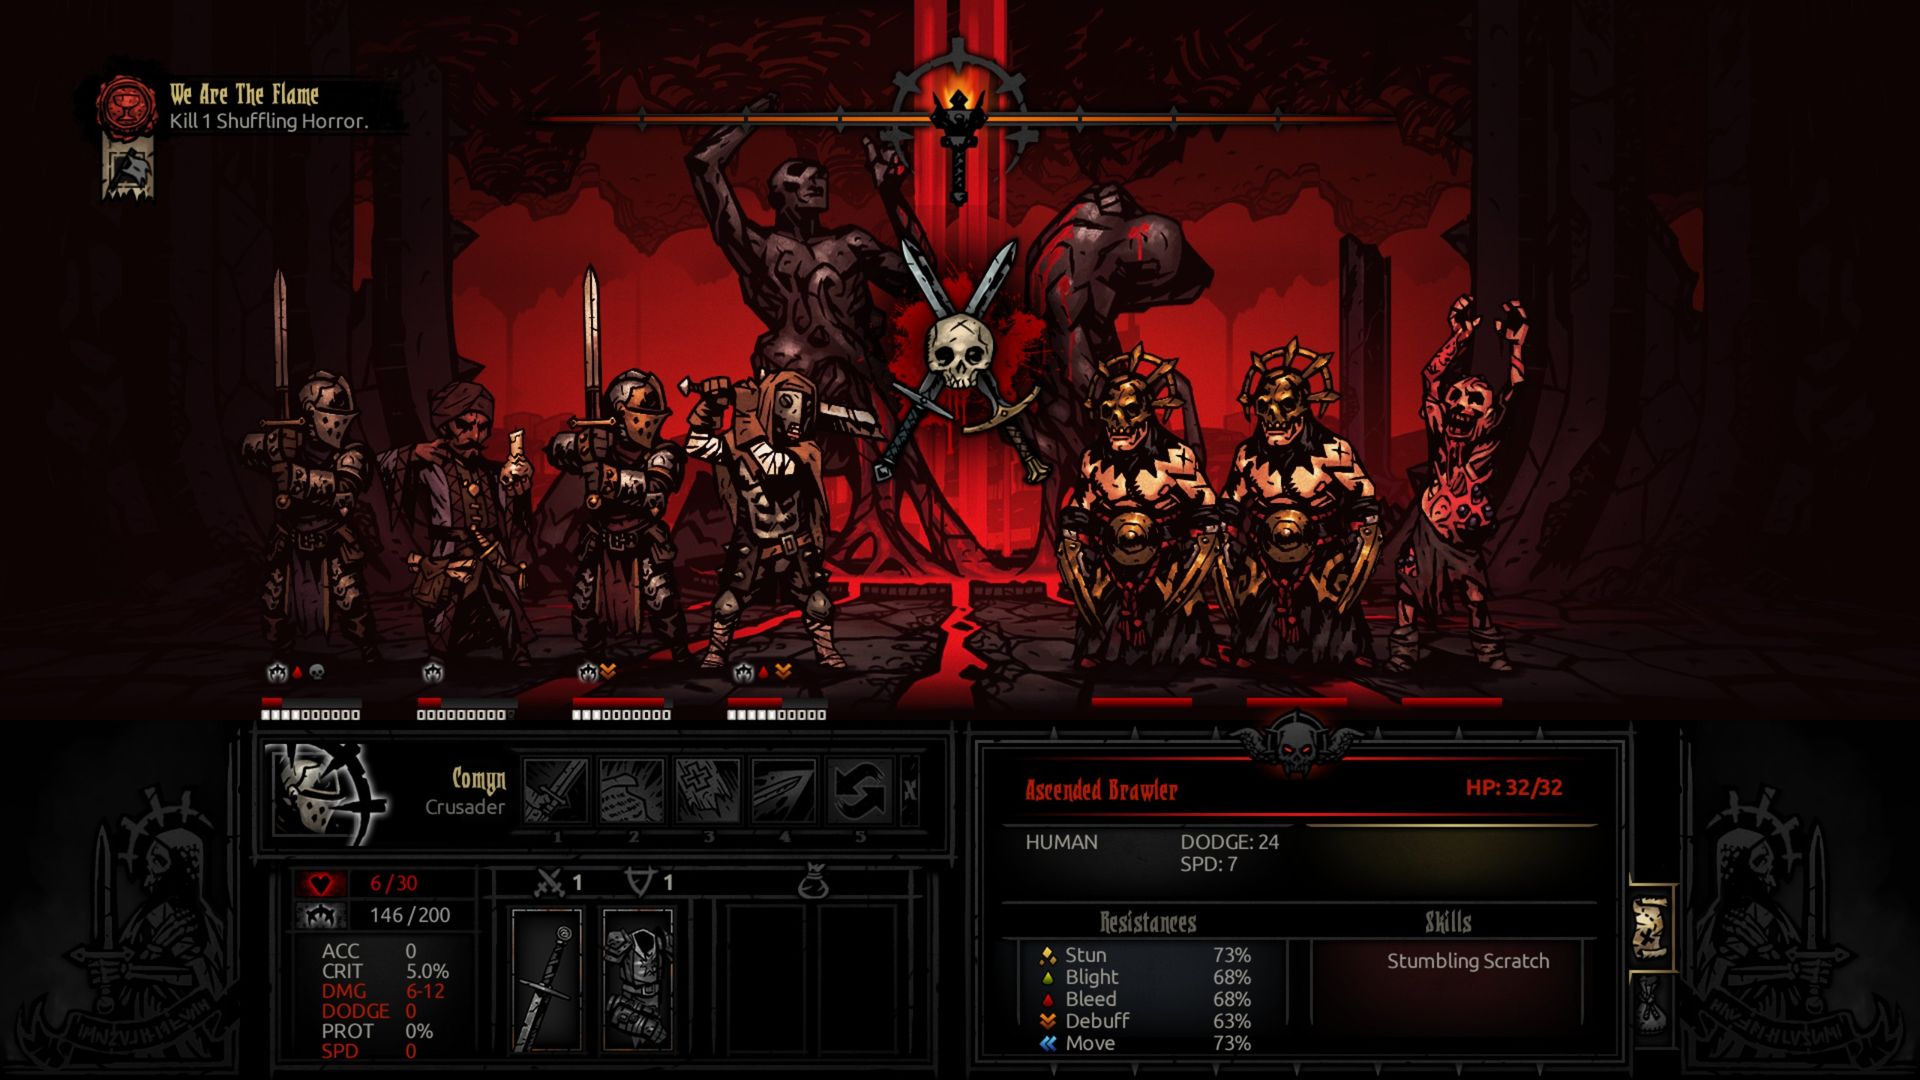 Sending low-level characters to the Darkest Dungeon? For an achievement? Hell yeah! - 2016-02-01